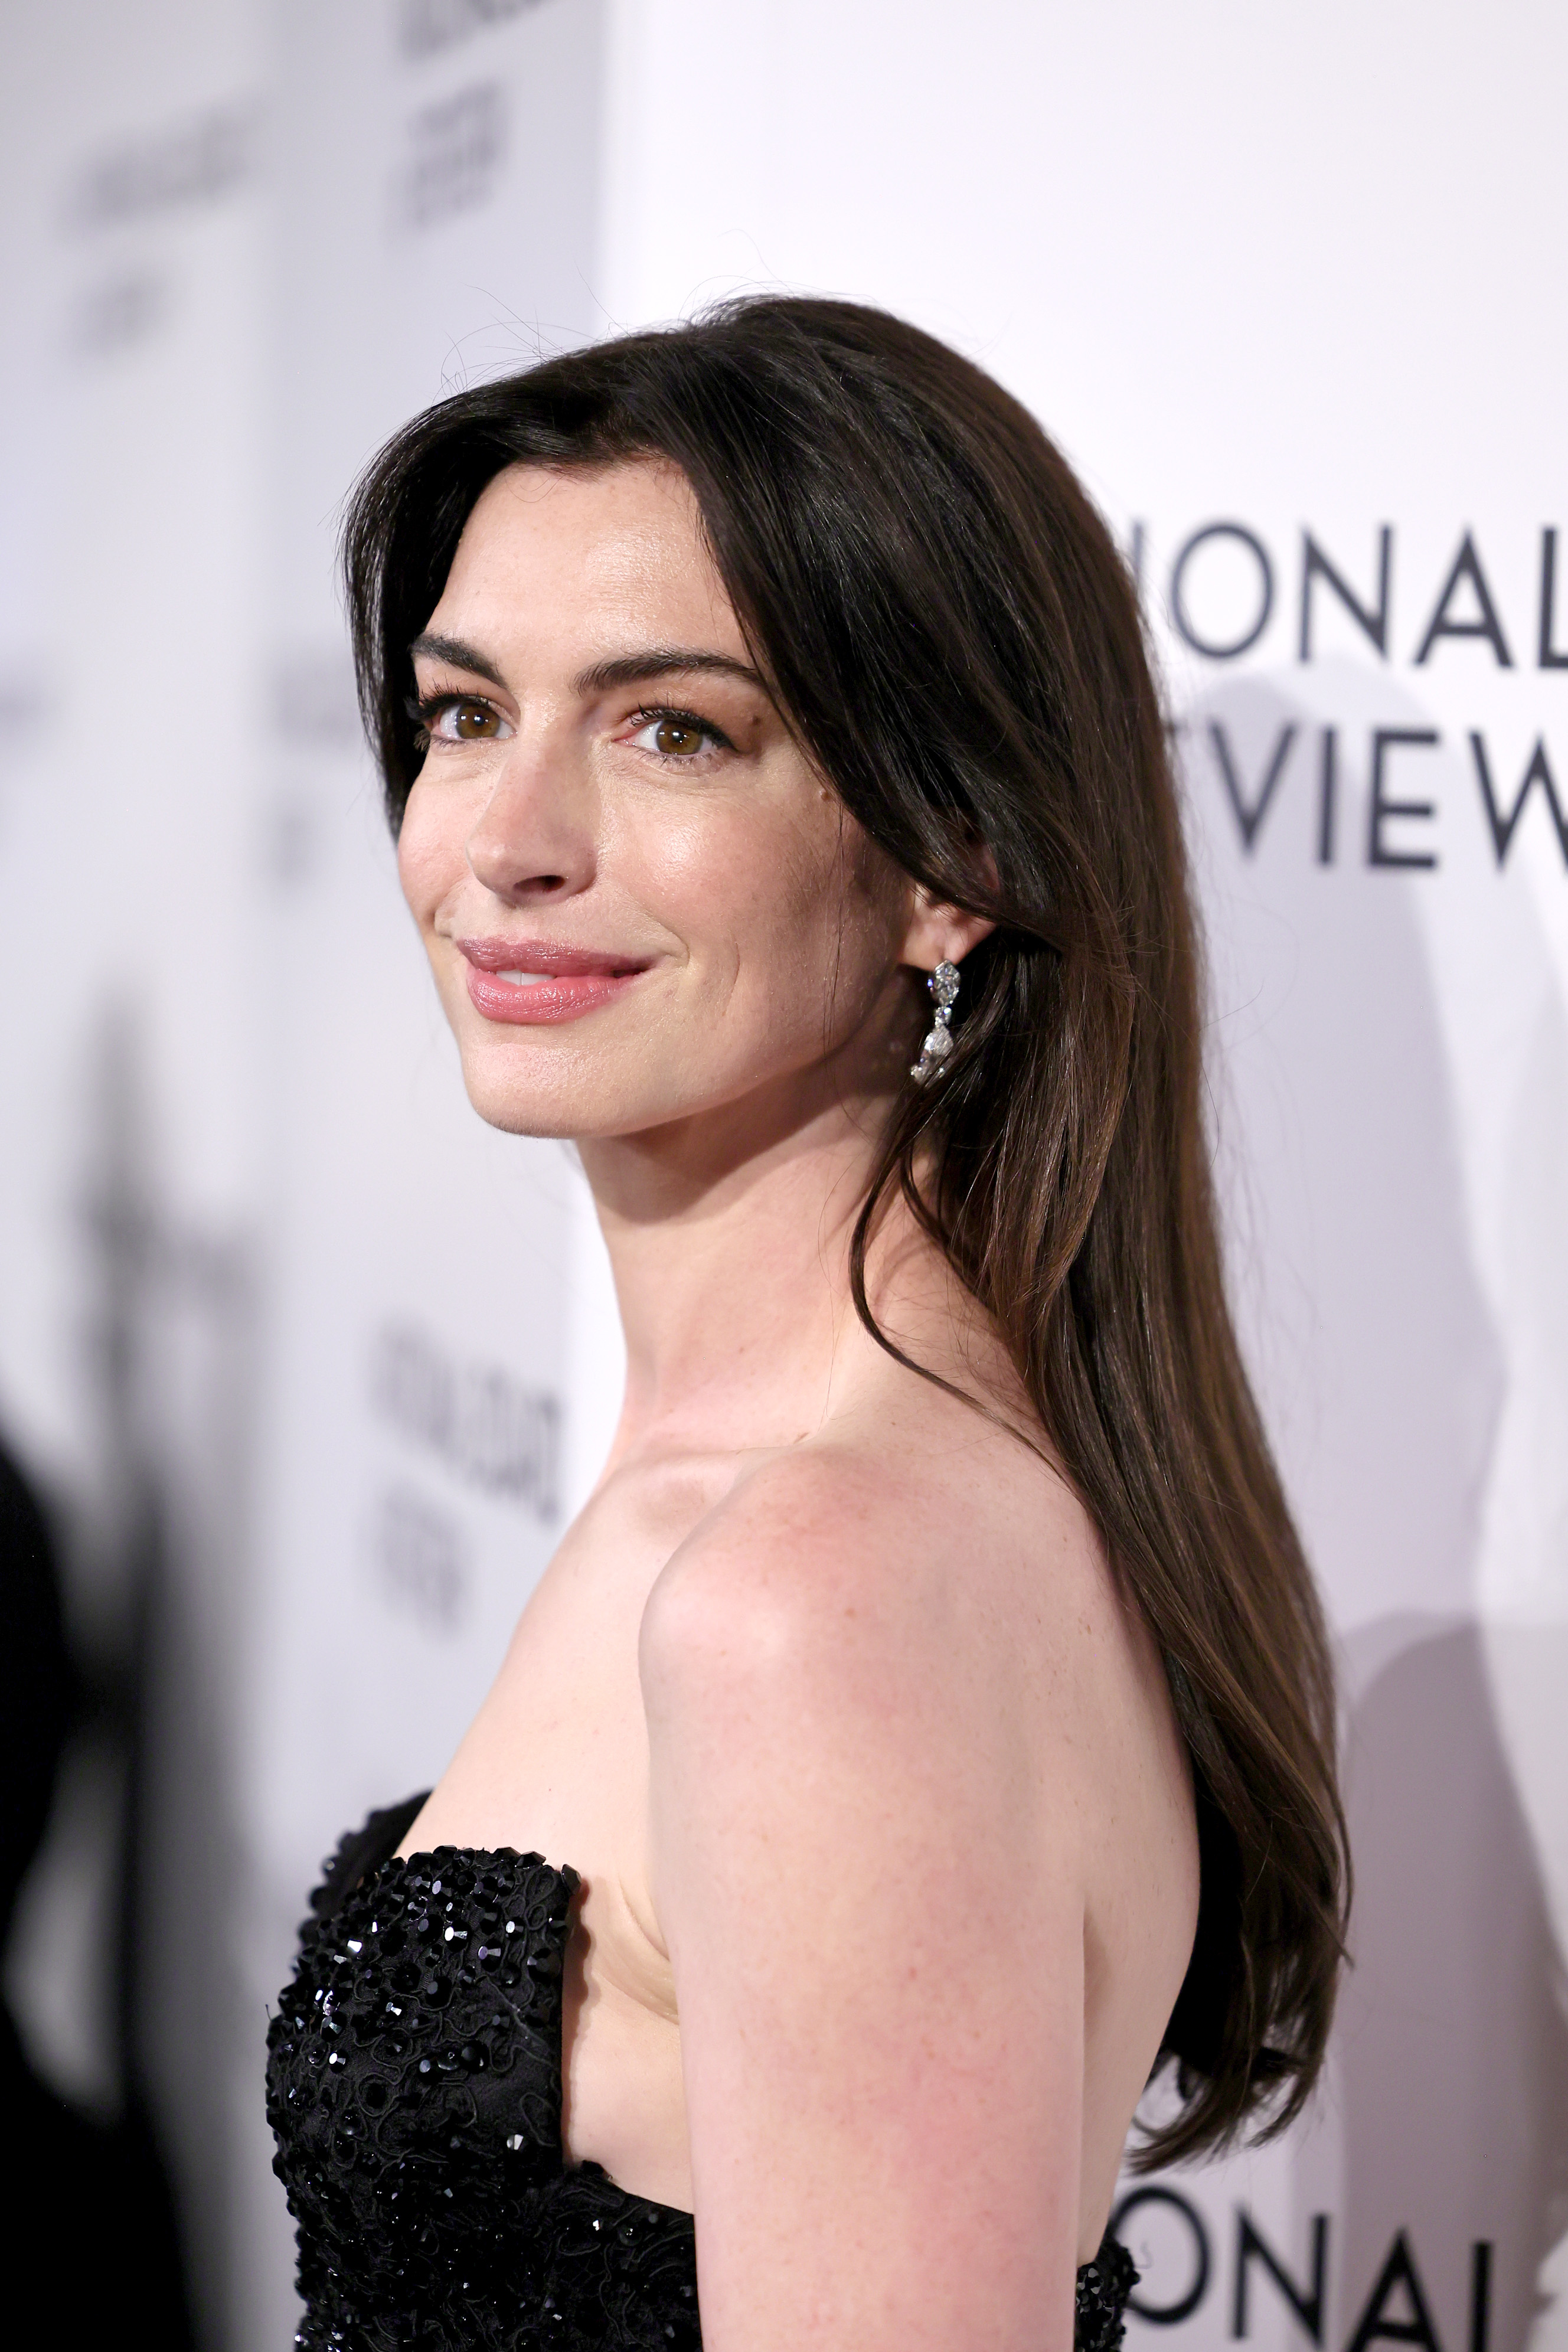 Anne Hathaway in a black sequined dress with one shoulder design, posing with a smile at an event